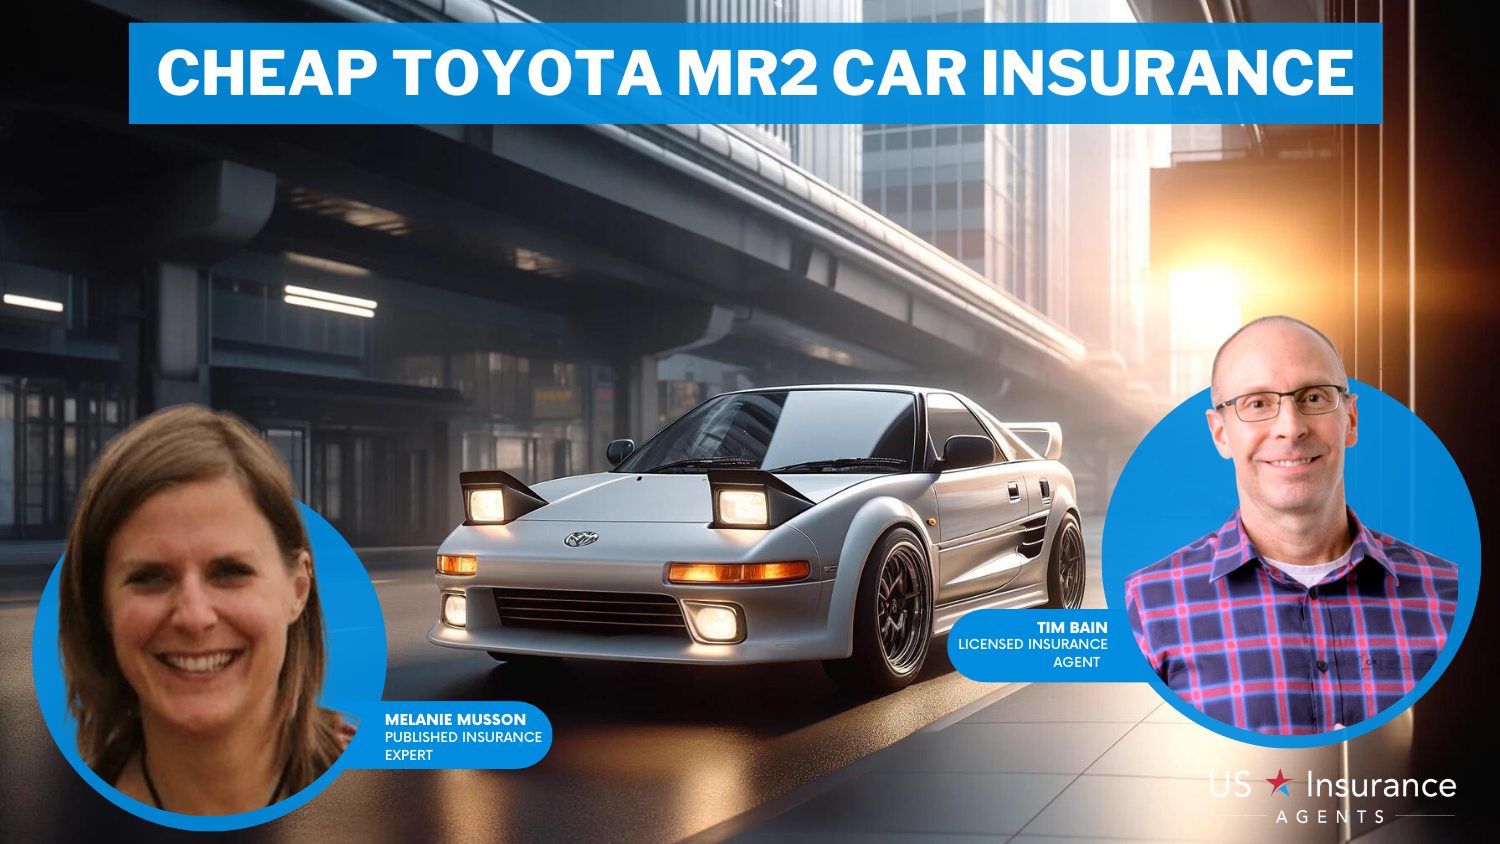 Cheap Toyota MR2 Car Insurance: The General, Progressive, and USAA